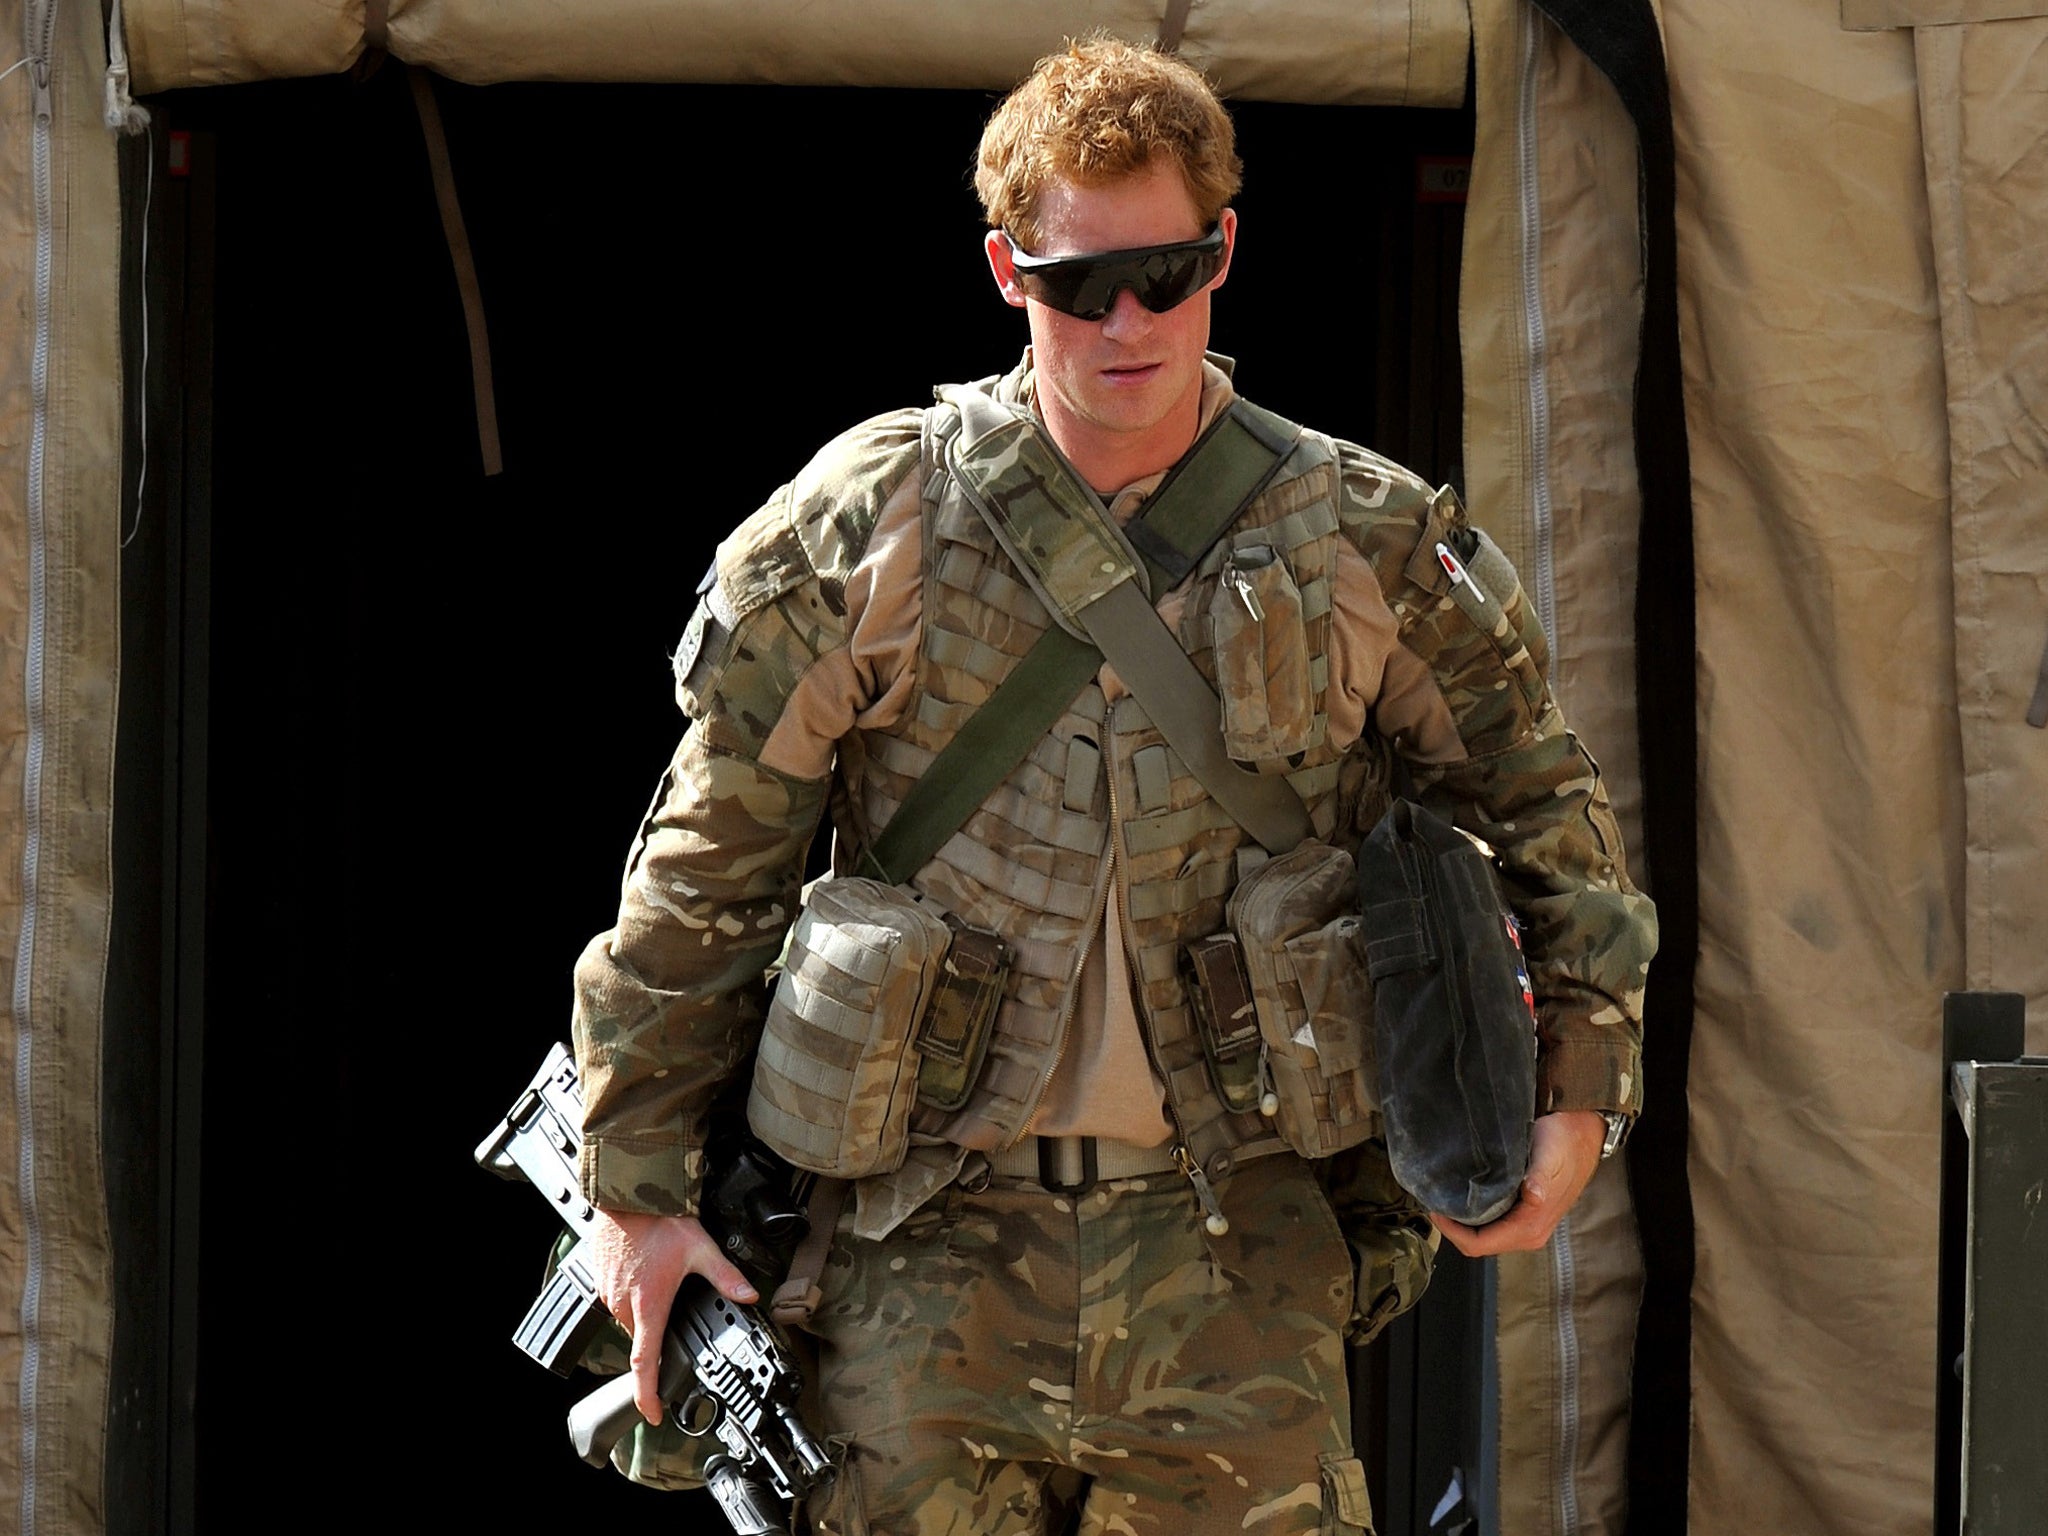 Prince Harry faced widespread criticism for discussing his time in Afghanistan in his book Spare